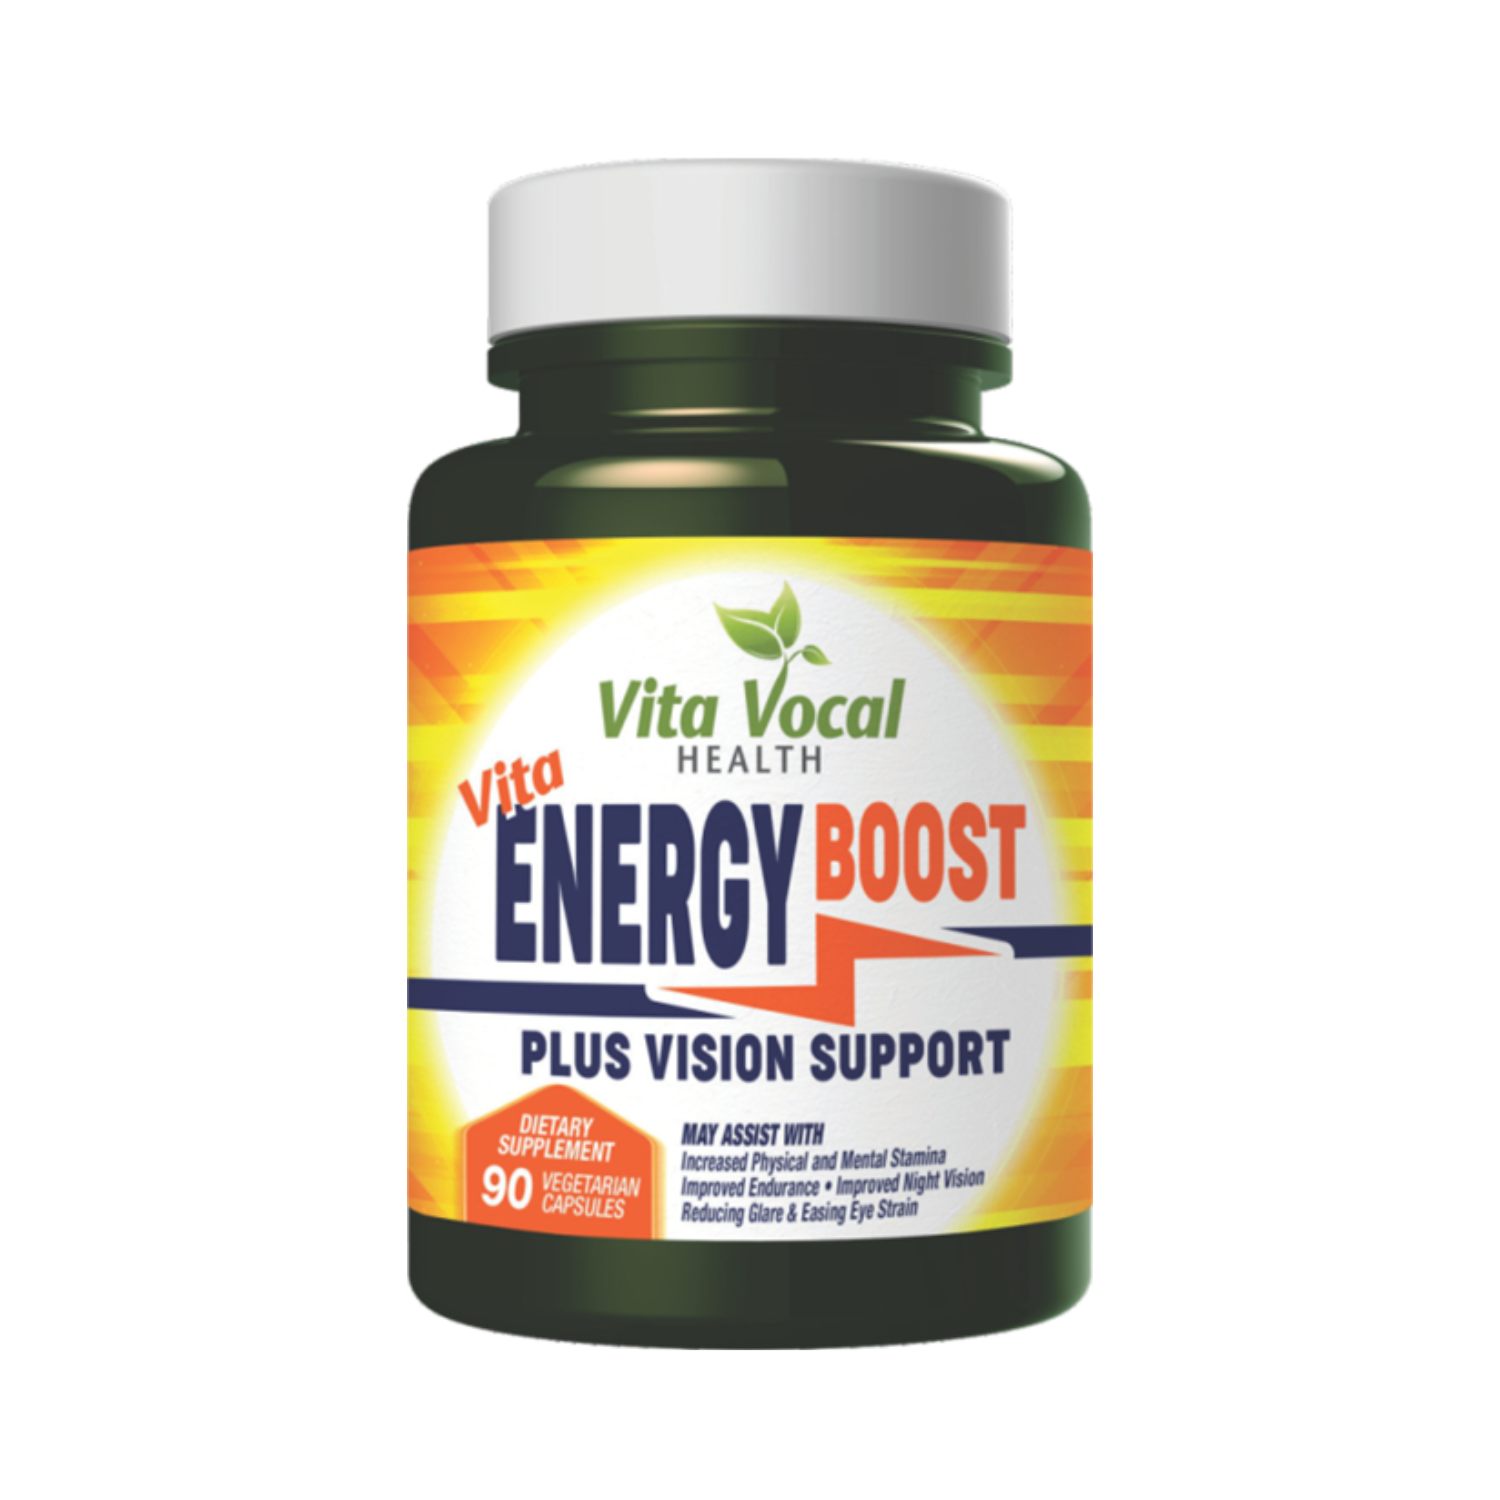 Vita Energy Boost plus Vision Support | Vita Vocal Best Vitamins and Supplements